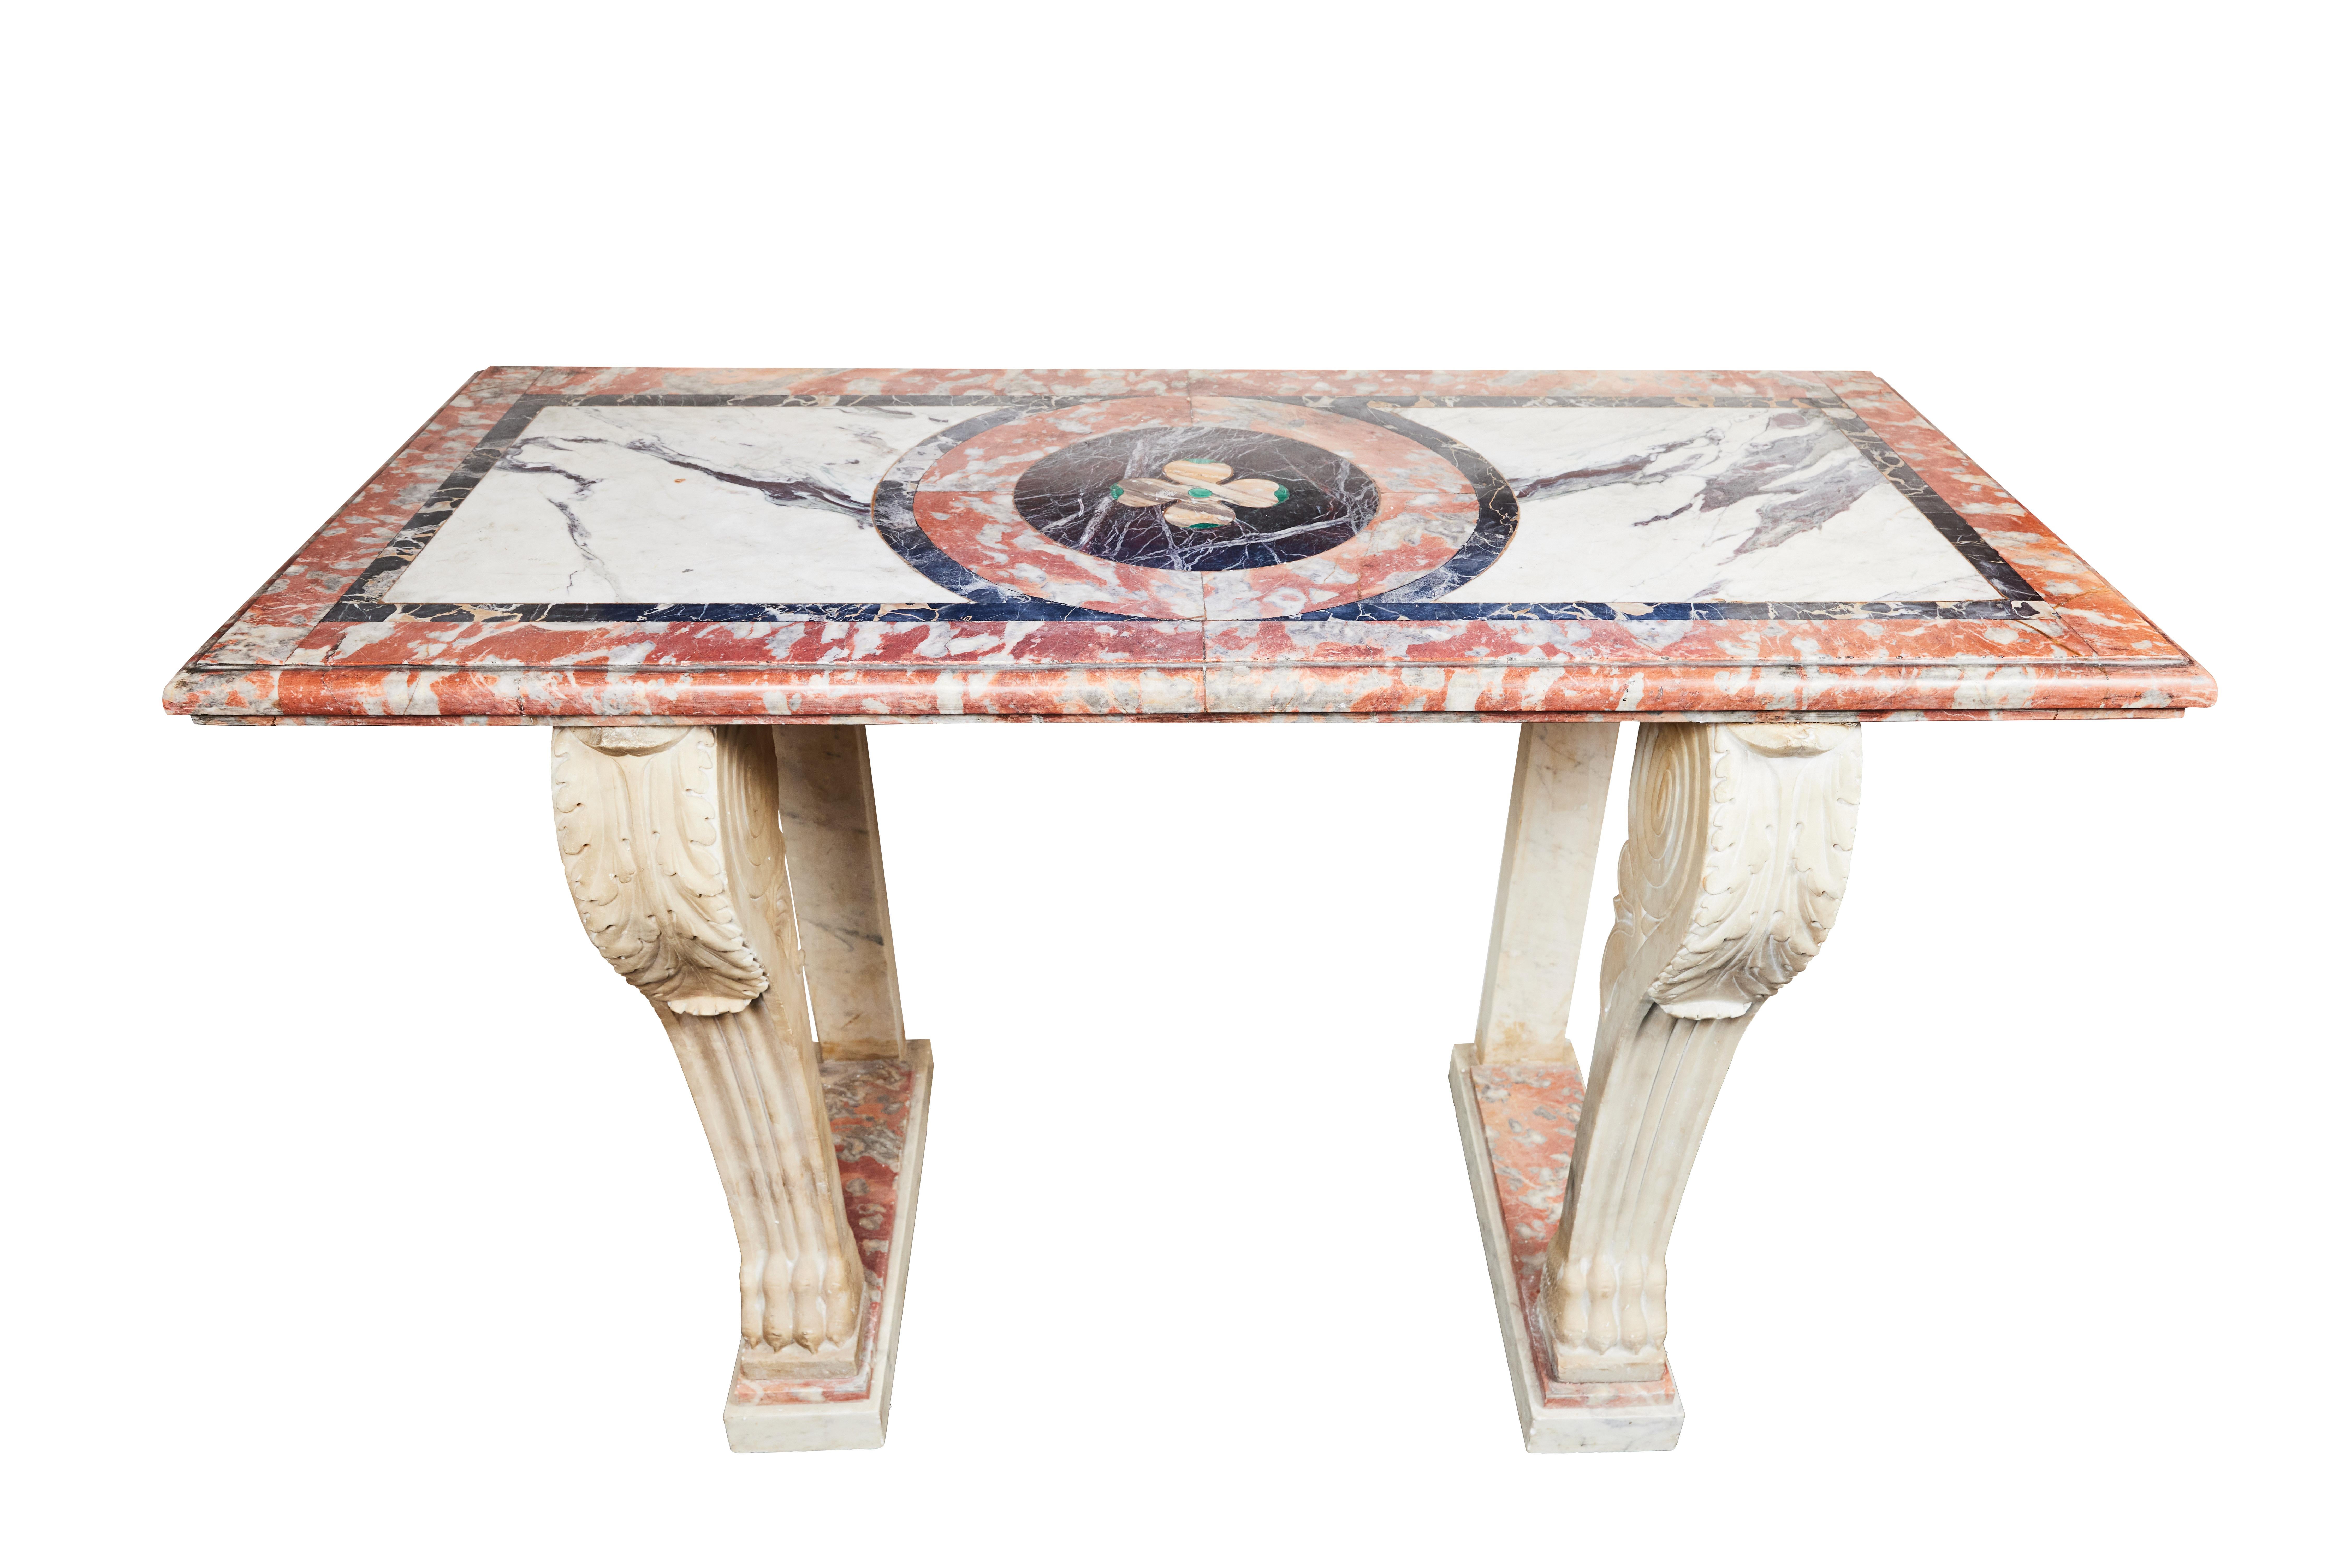 A vibrant, 19th century, French, solid marble, multi-hued console table featuring an inlaid top centered on a clover medallion. The hand carved base has convex legs with acanthus leaf reliefs above fluted pilasters. Each terminating in stylized claw